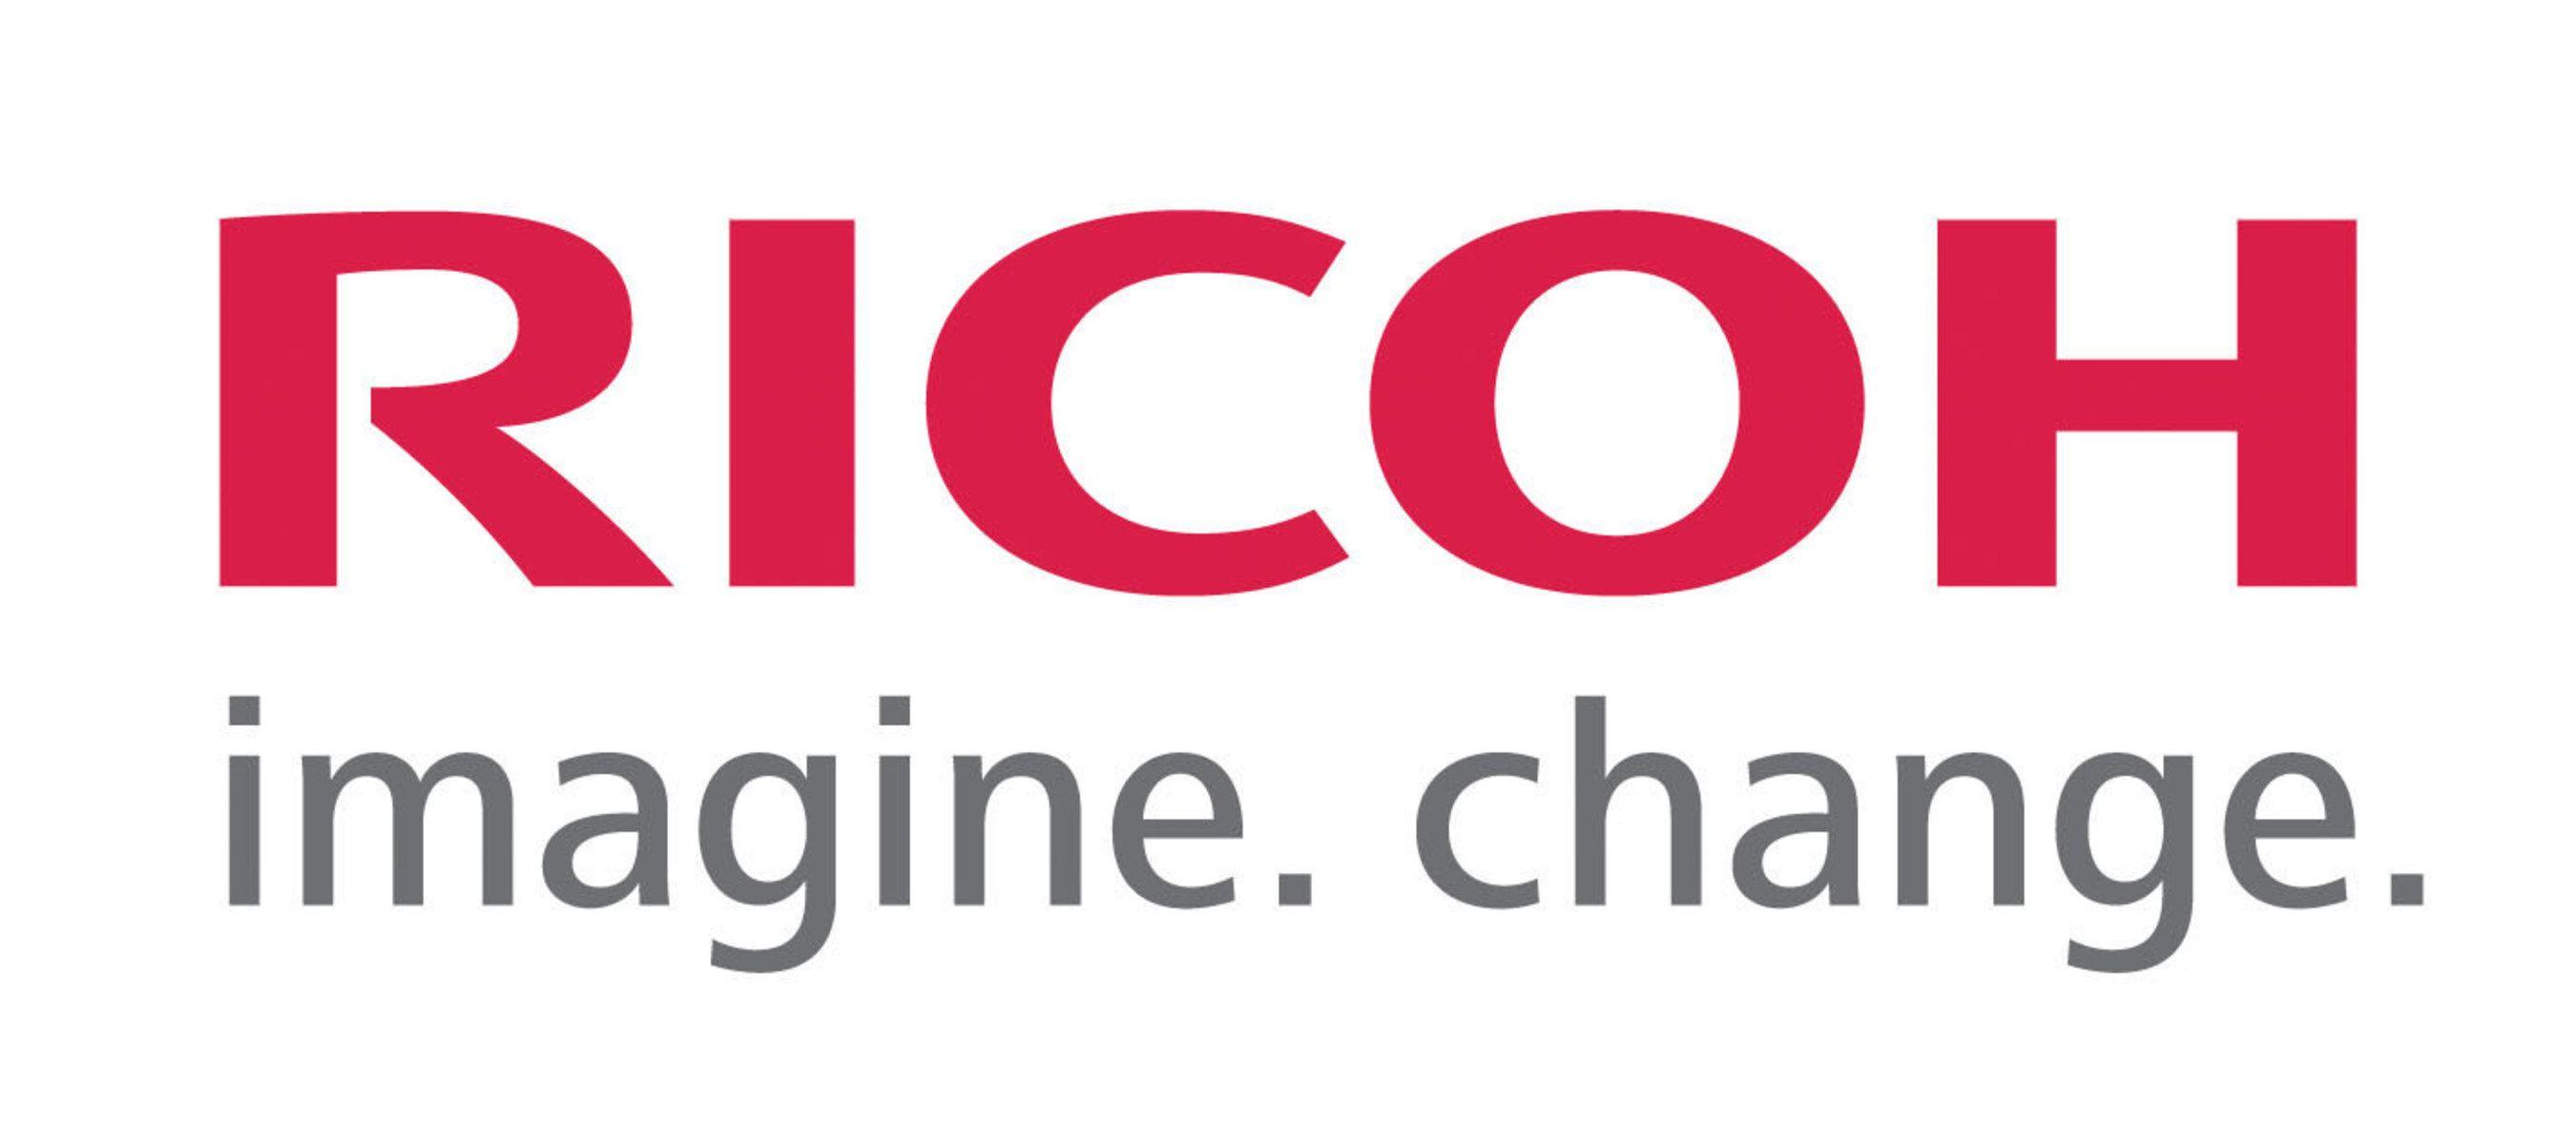 Ricoh Imagine Change Logo - Laser projector series from Ricoh shines new light on sharing